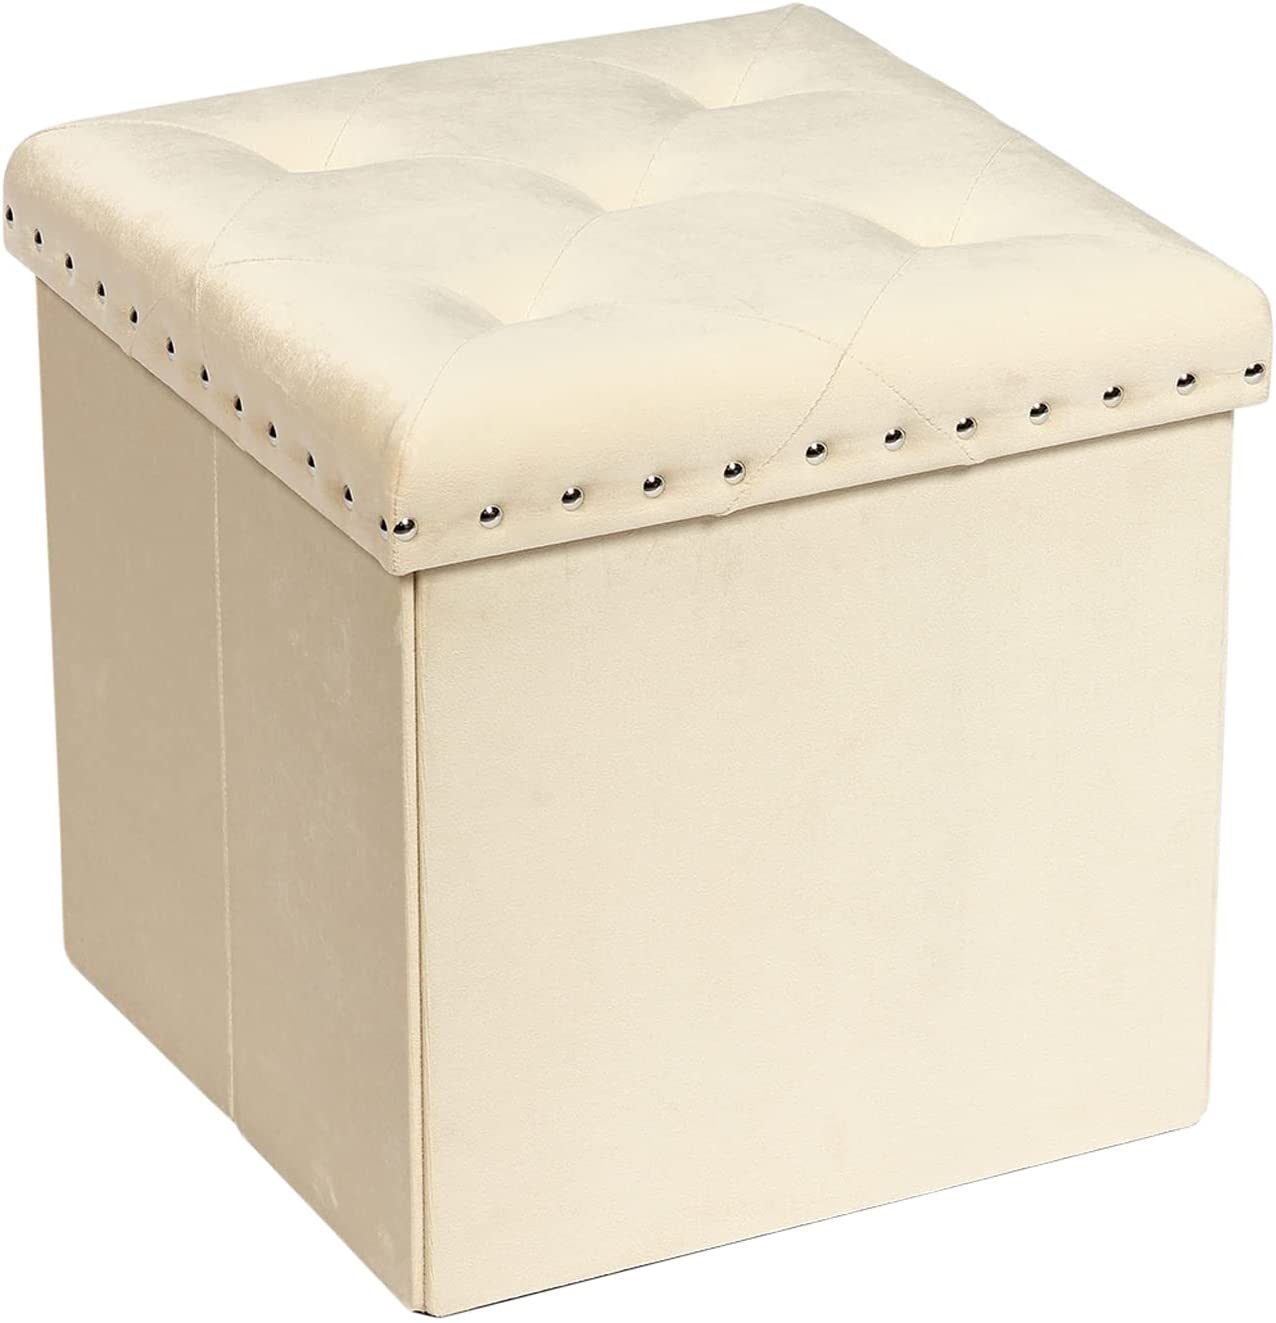 PINPLUS 15.7" Beige Velvet Folding Storage Ottoman Cube, Small Foot Rest Stool, Window Seat for Living Room, Toy Chest Box with Rivet Tray - image 1 of 7